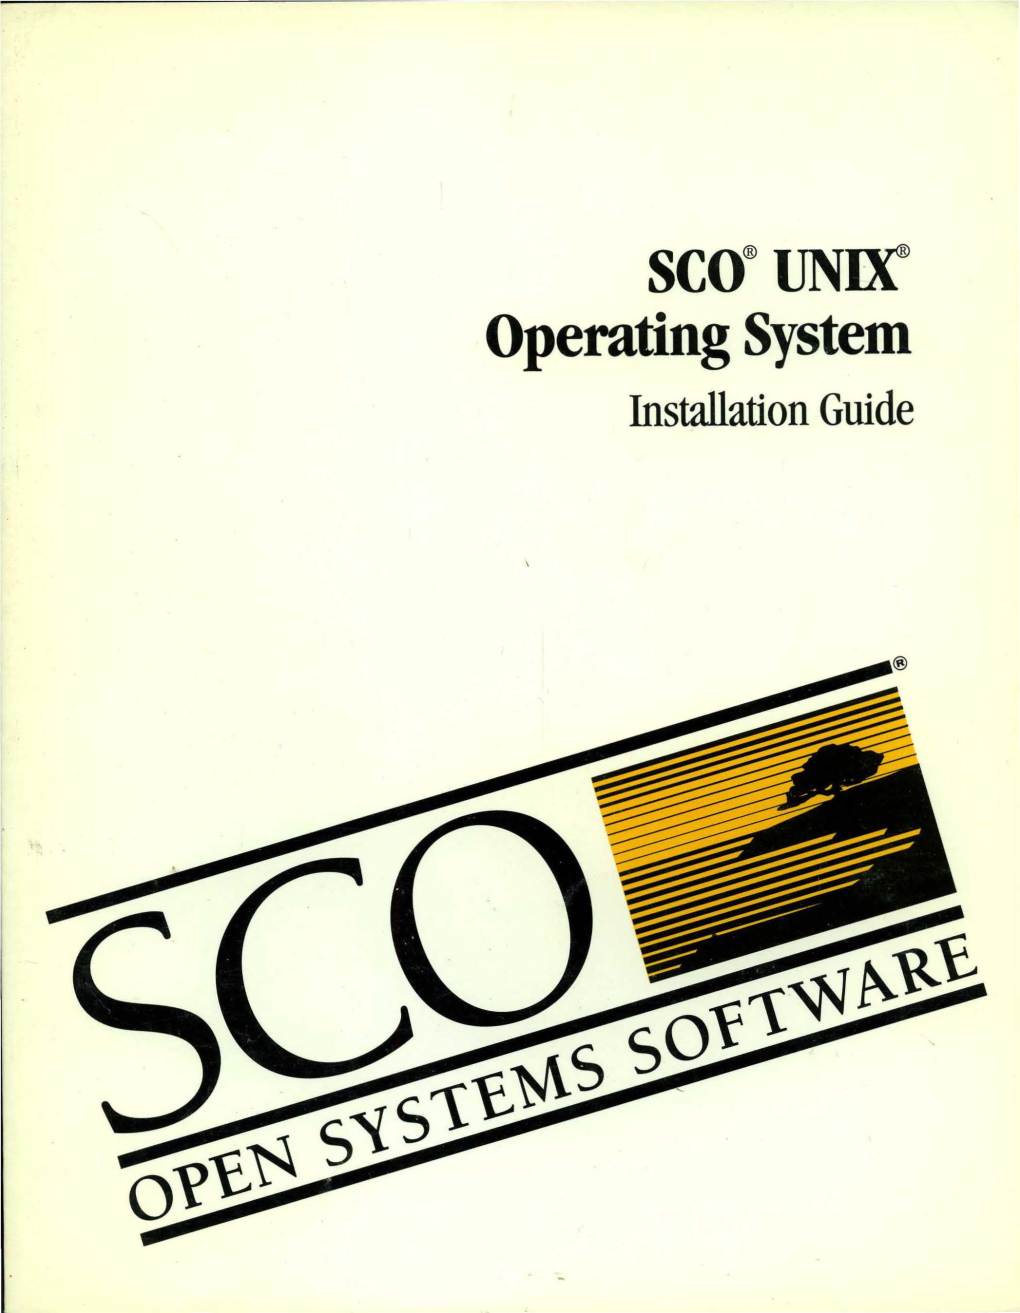 SCO®UNOC Operating System Installation Guide SCO®UNIX® Operating Systetn Installation Guide